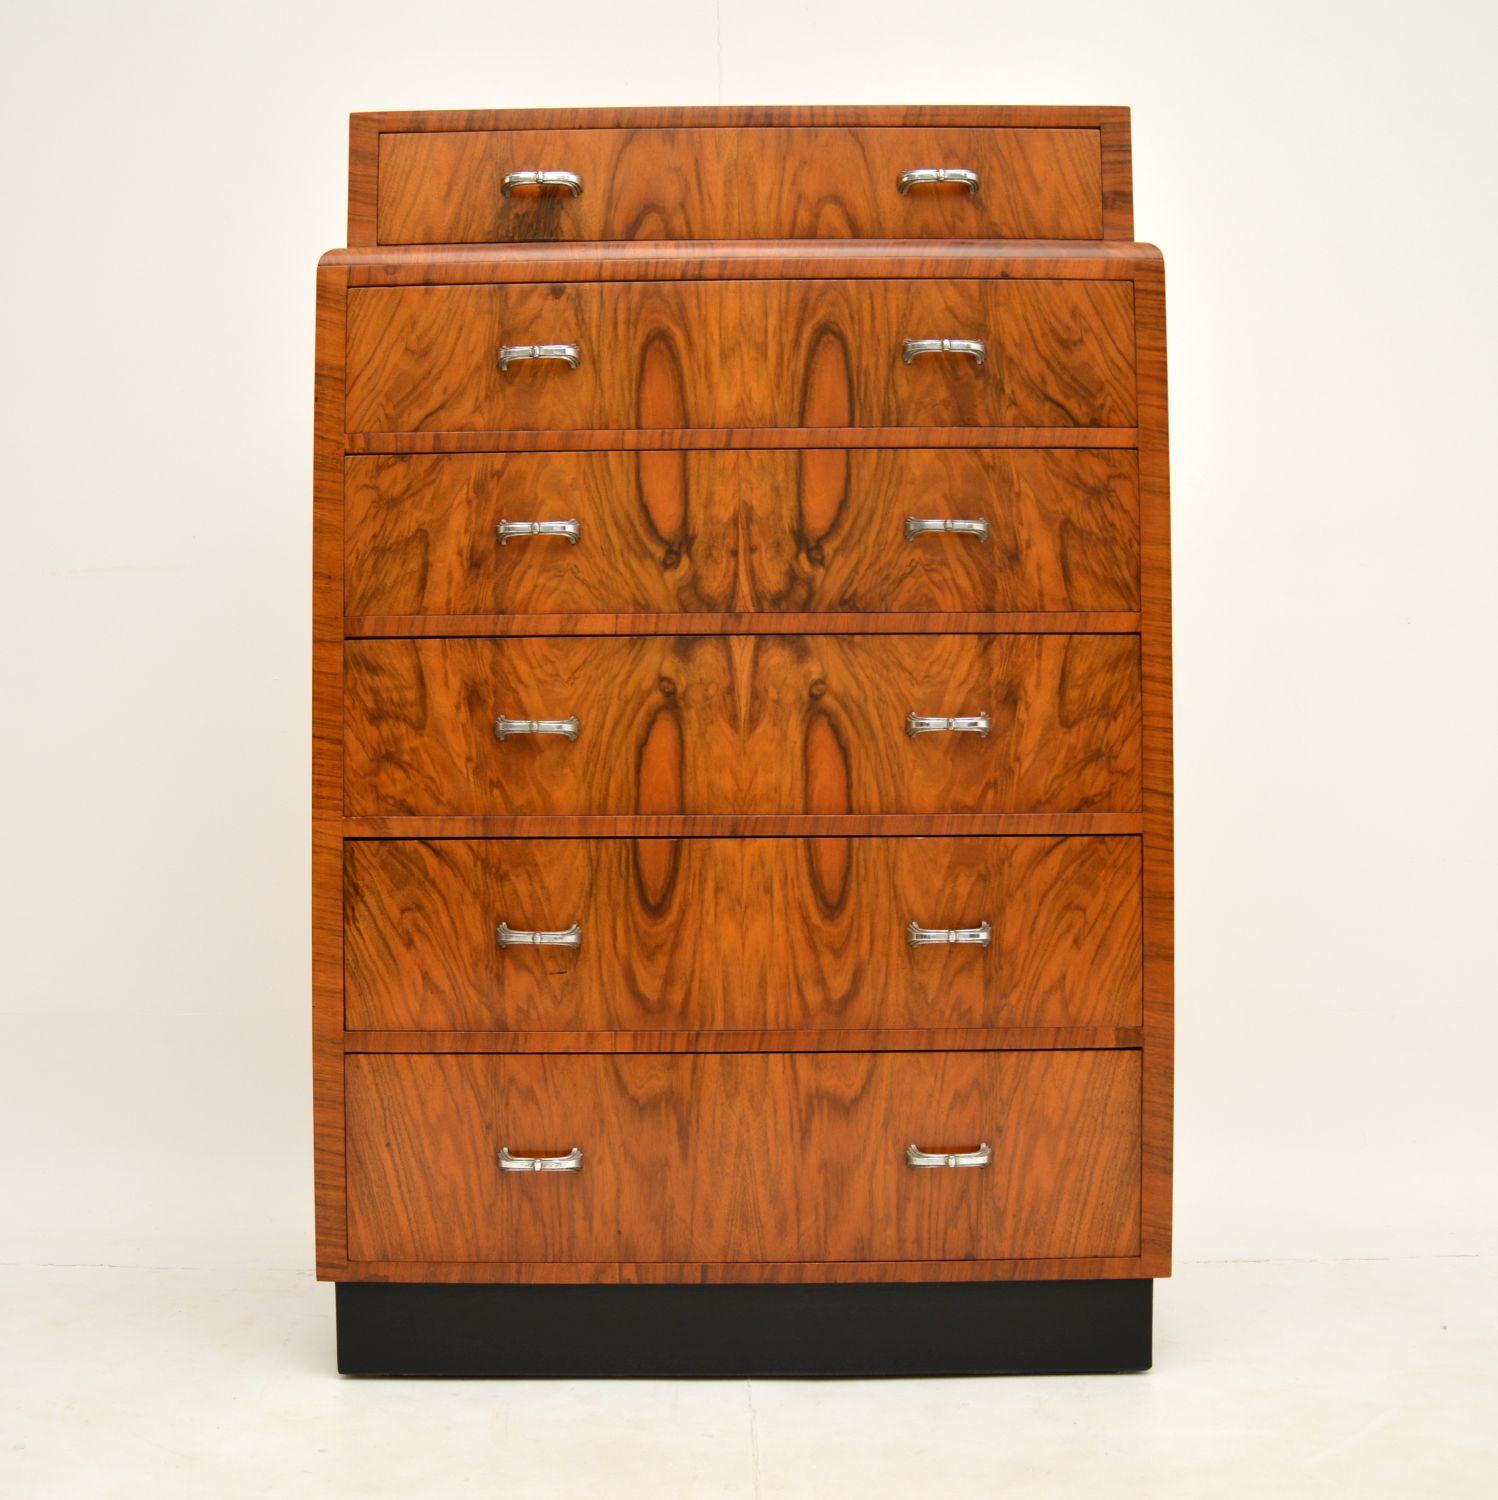 A stunning vintage Art Deco period chest of drawers in walnut. This dates from the 1930’s.

It is of amazing quality, with solid wood construction and absolutely beautiful figured walnut veneers. This has the original chrome handles, and a lovely